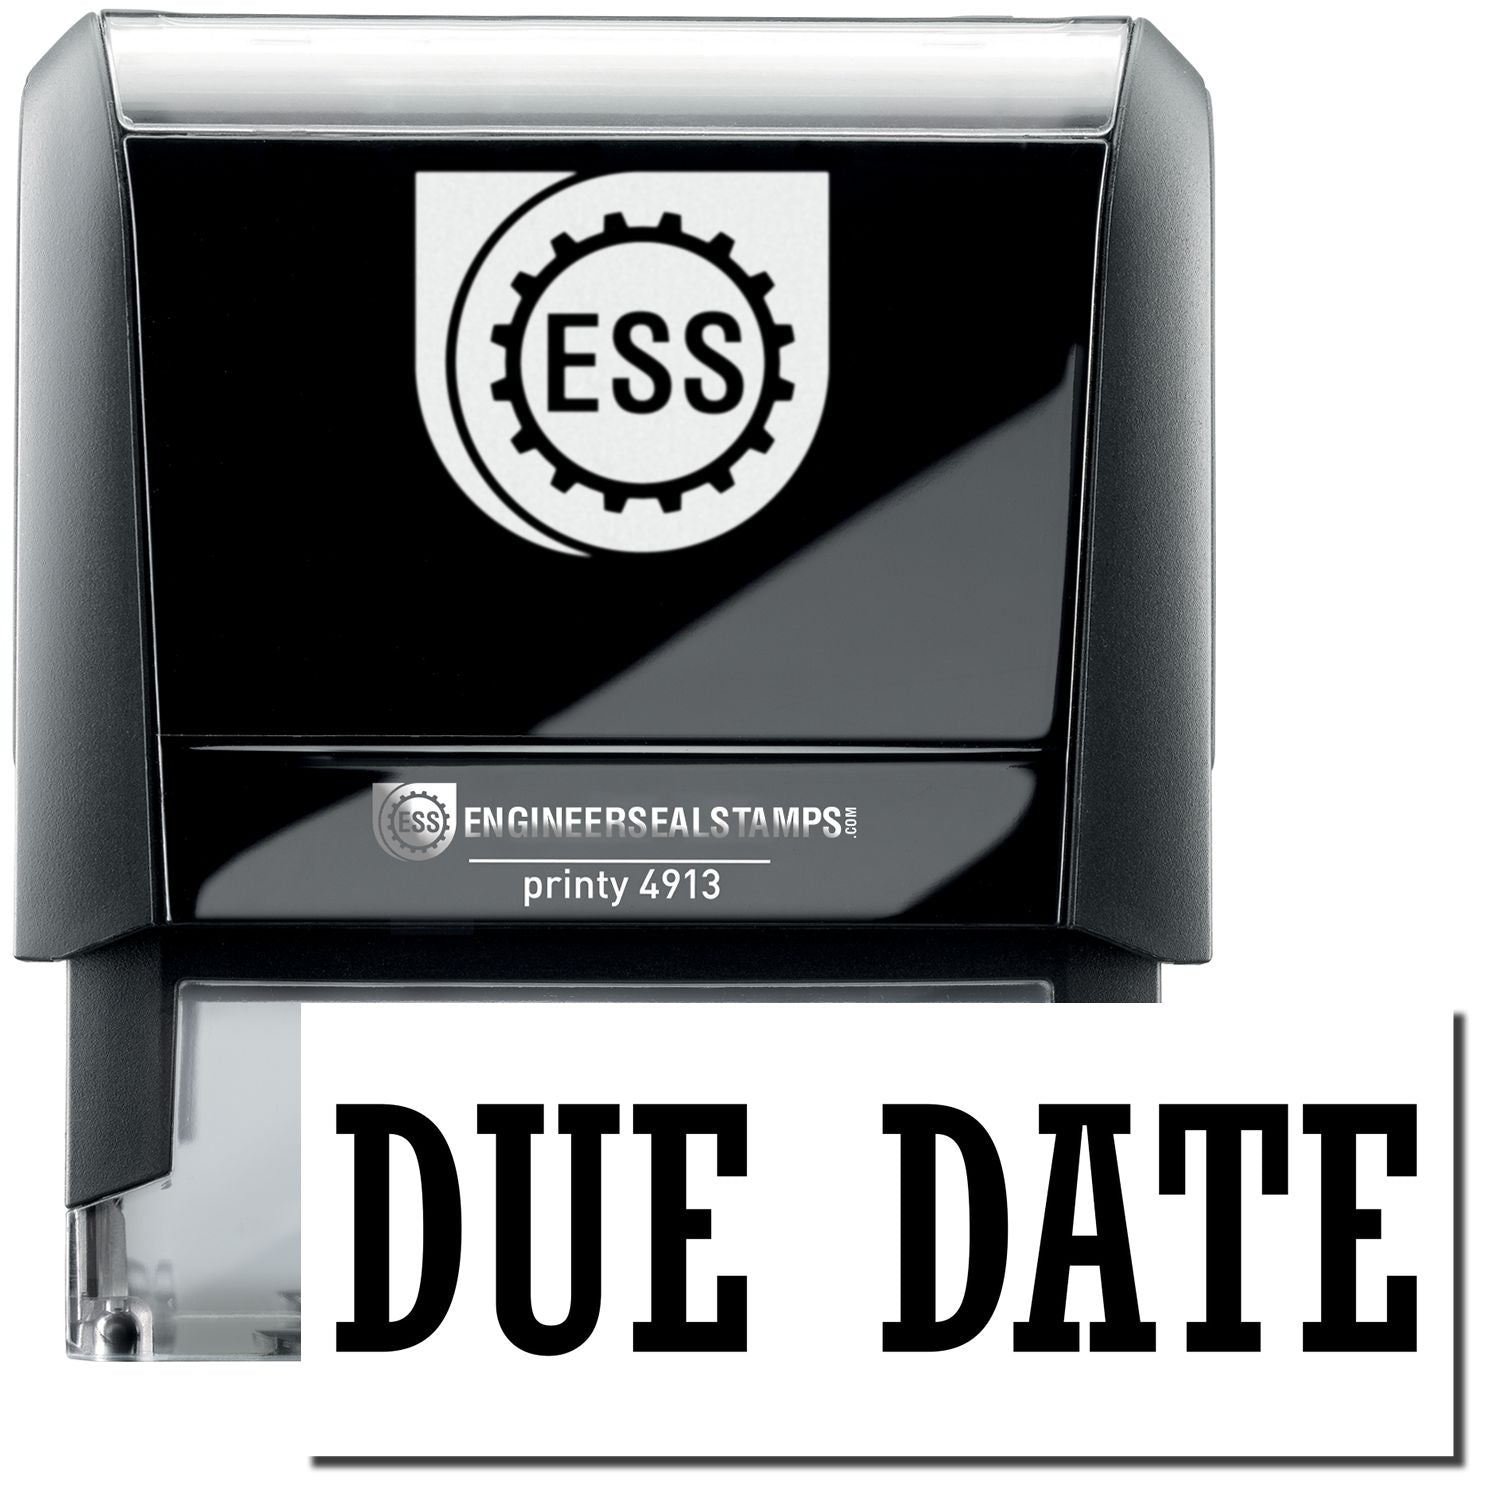 A self-inking stamp with a stamped image showing how the text "DUE DATE" in a large bold font is displayed by it.